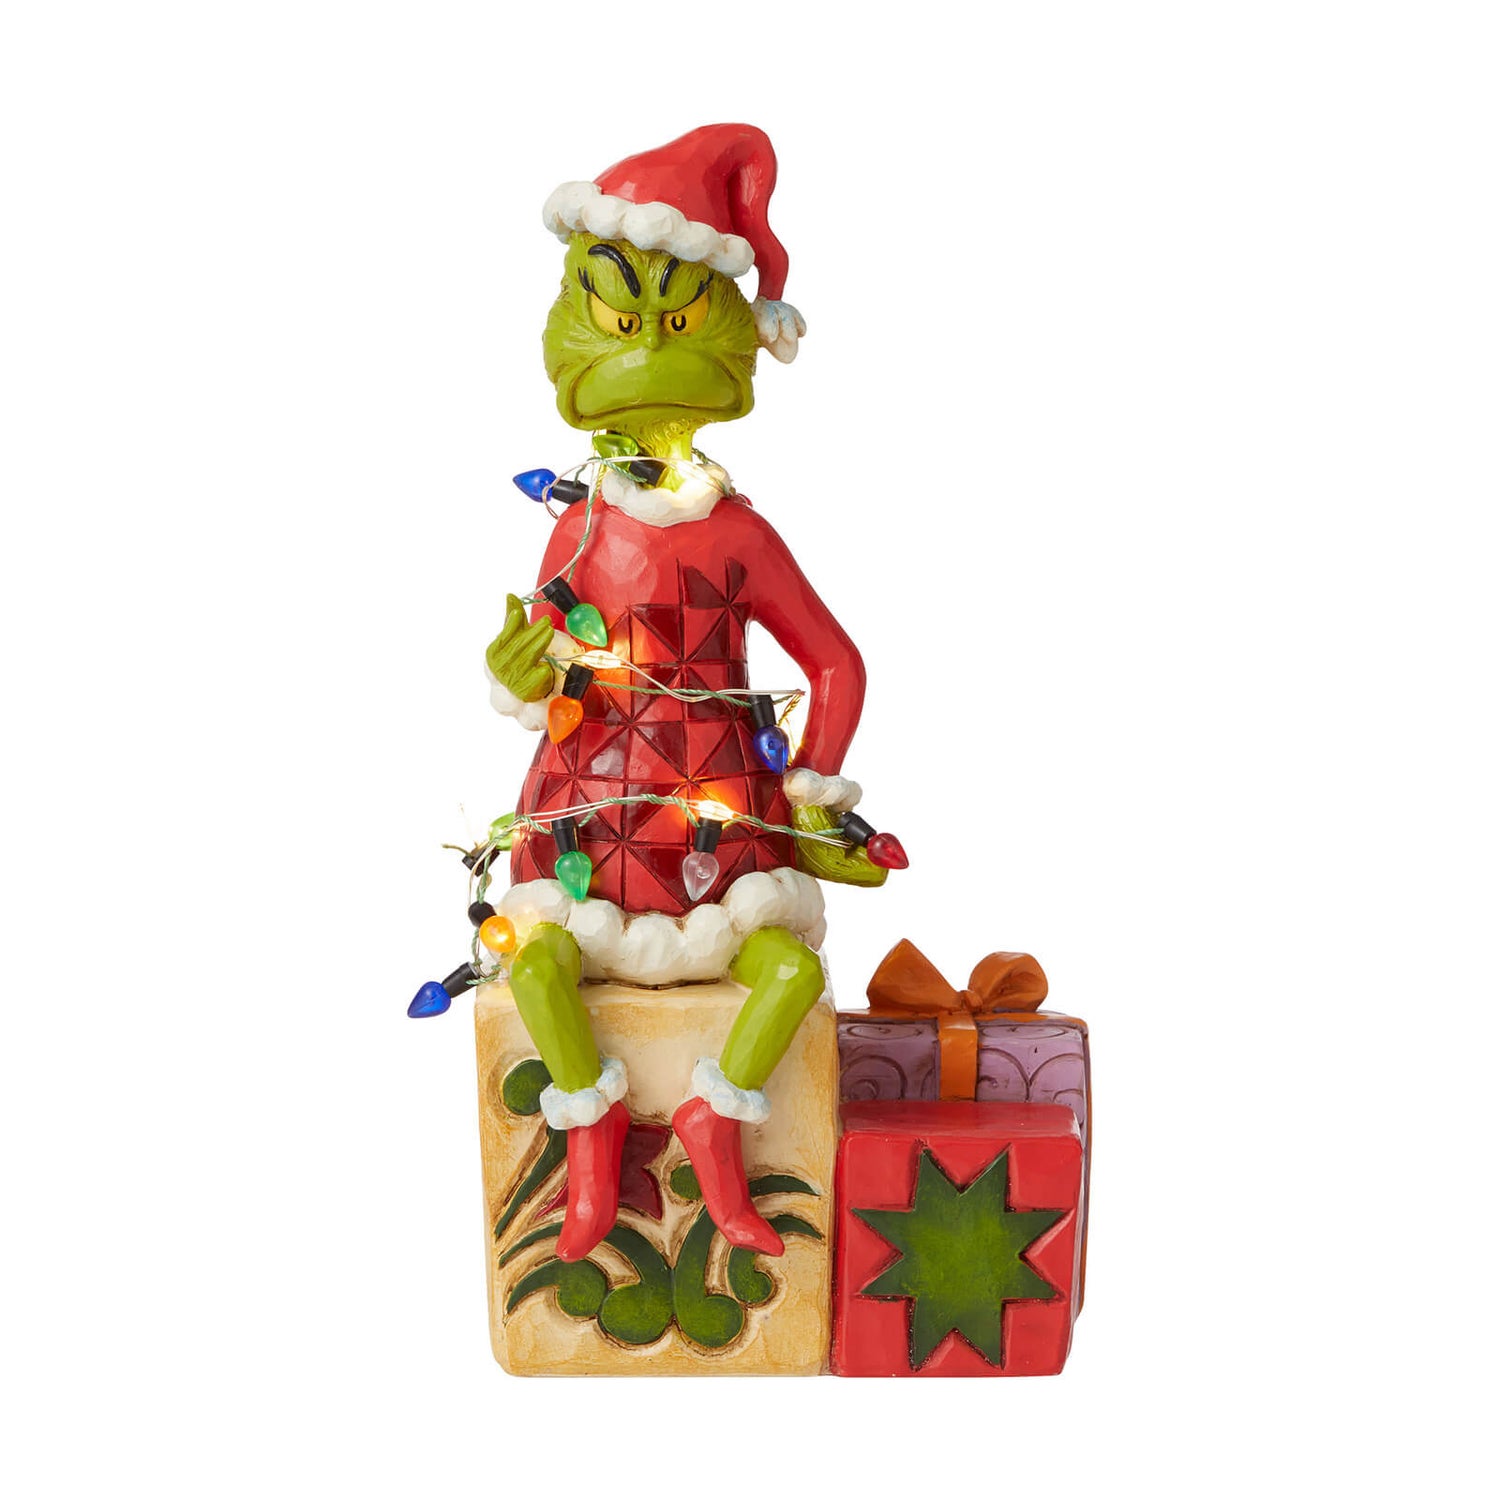 The Grinch By Jim Shore Grinch With Lights Figurine